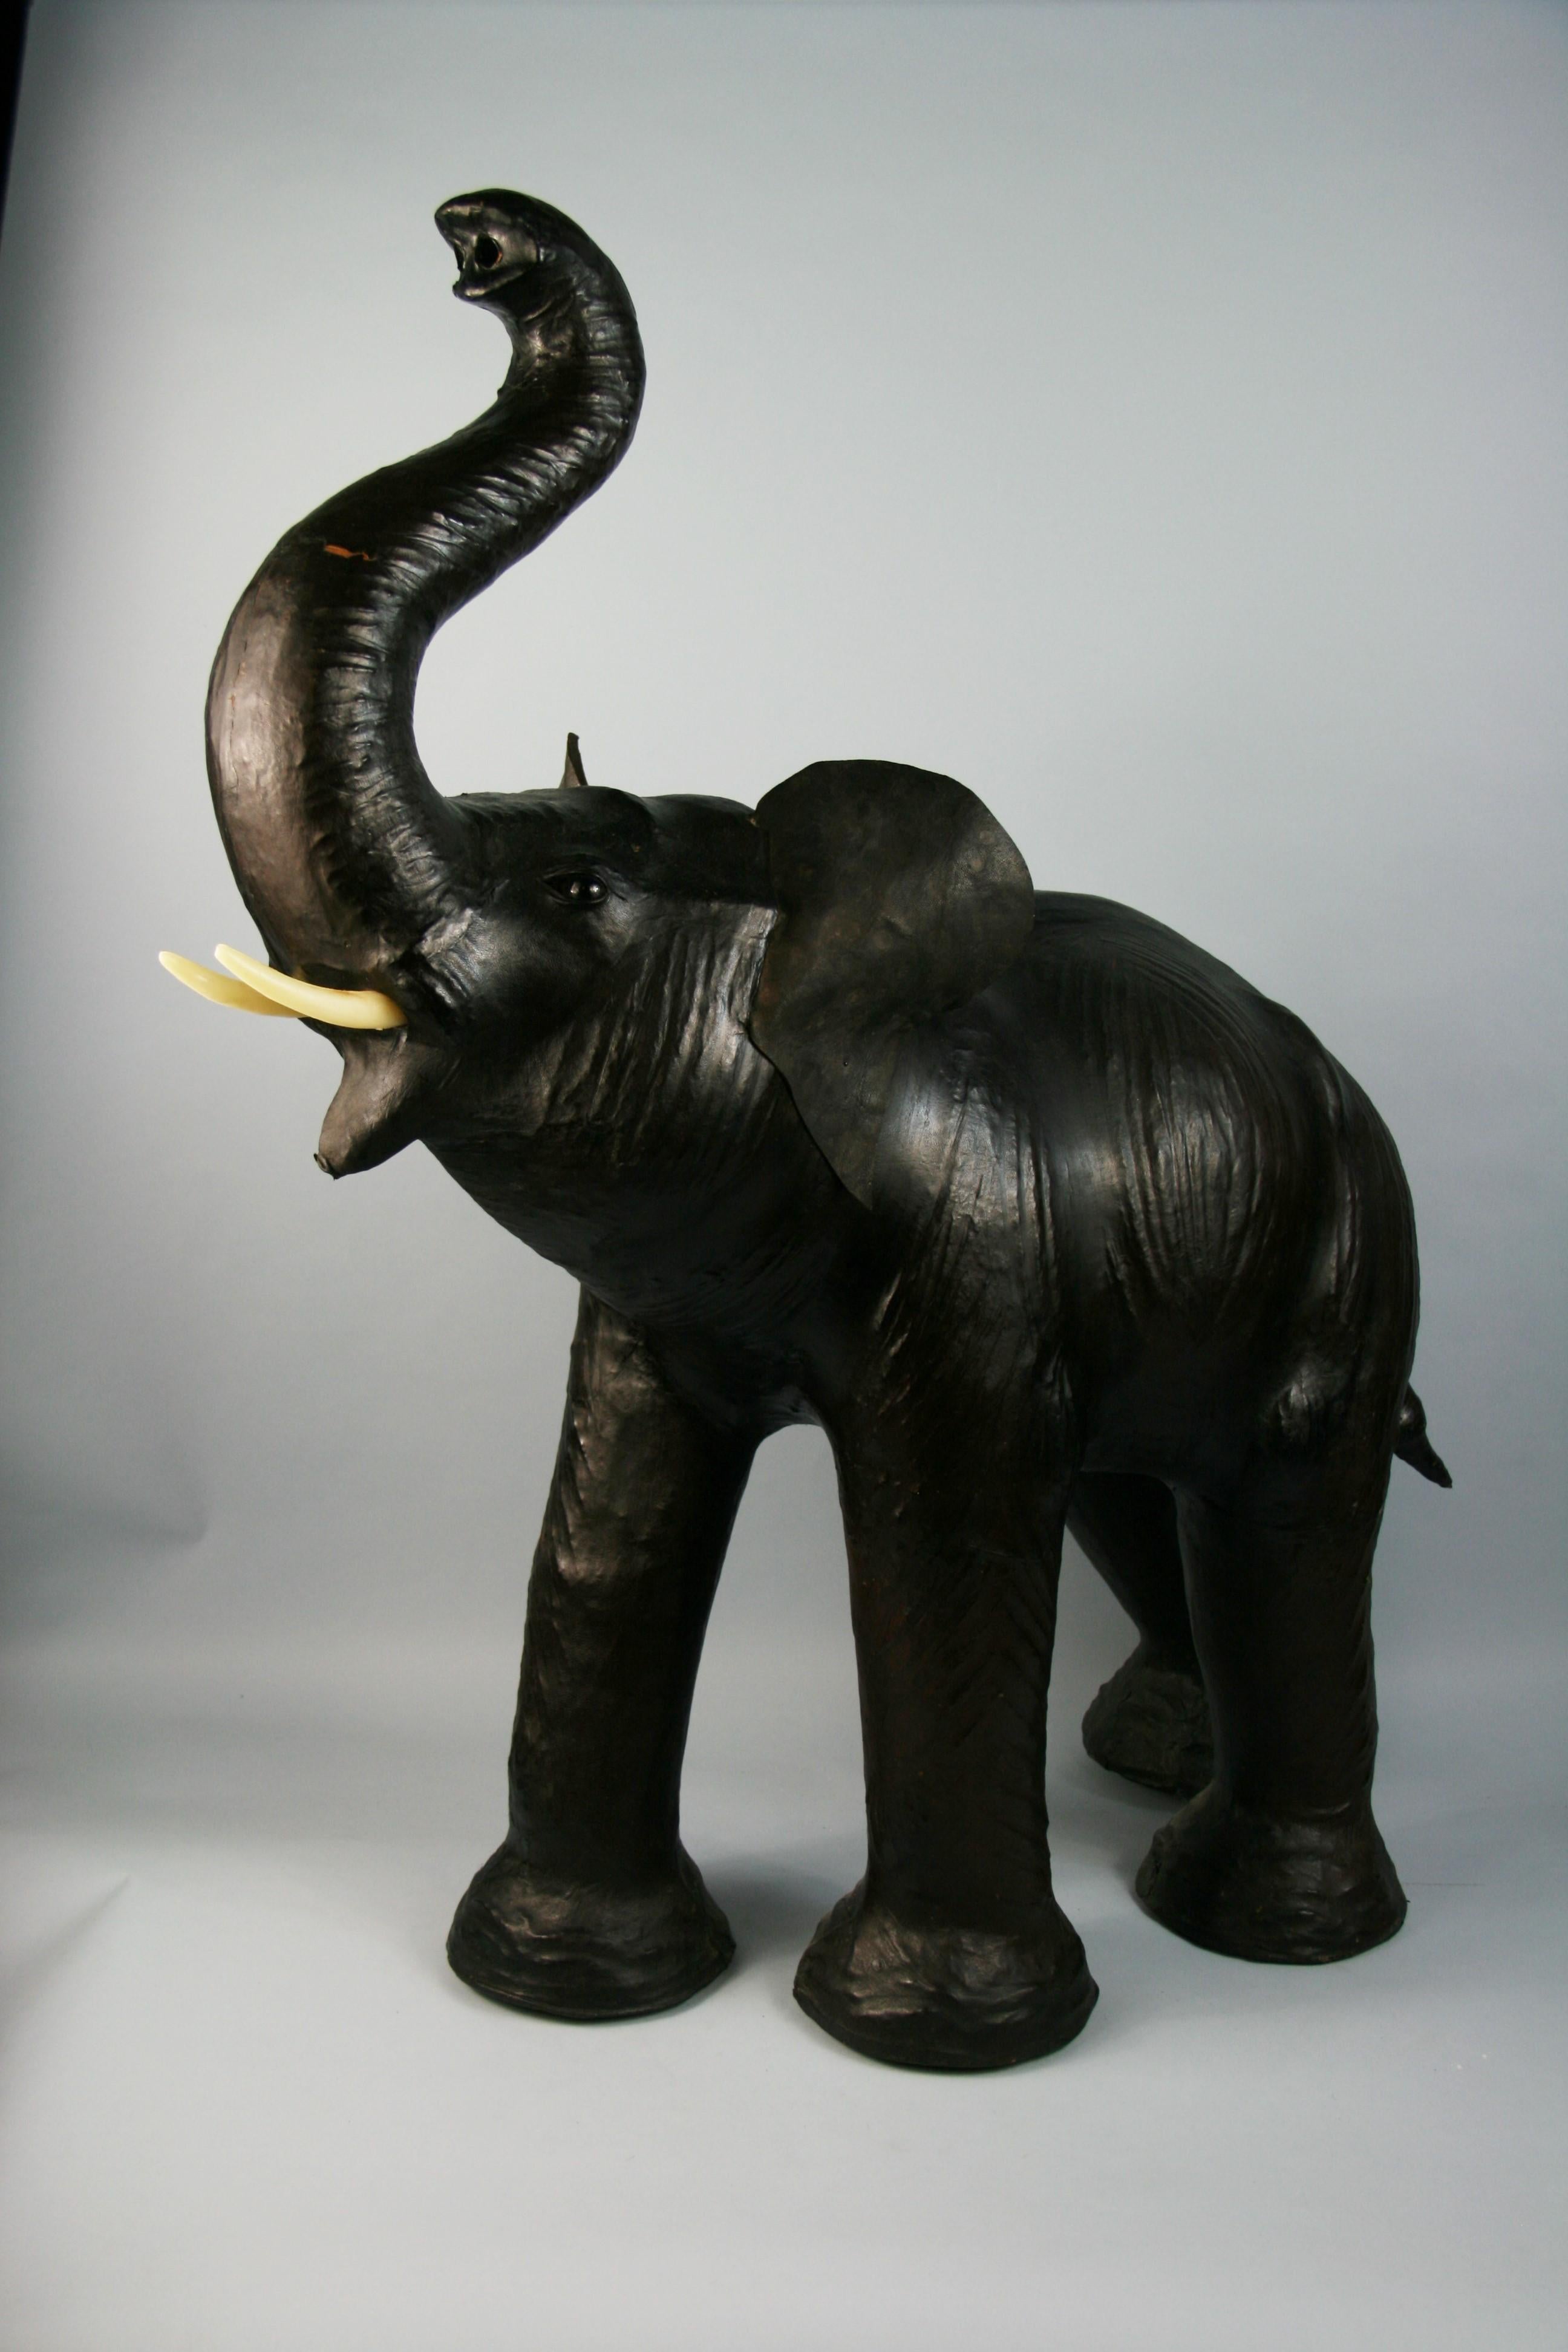 3-529 oversized leather elephant foot stool on a carved wood base.
Attributed to Dimitri Omersa for Abercrombie and Fitch
Dimensions are from top of trunk to bottom of foot.
  